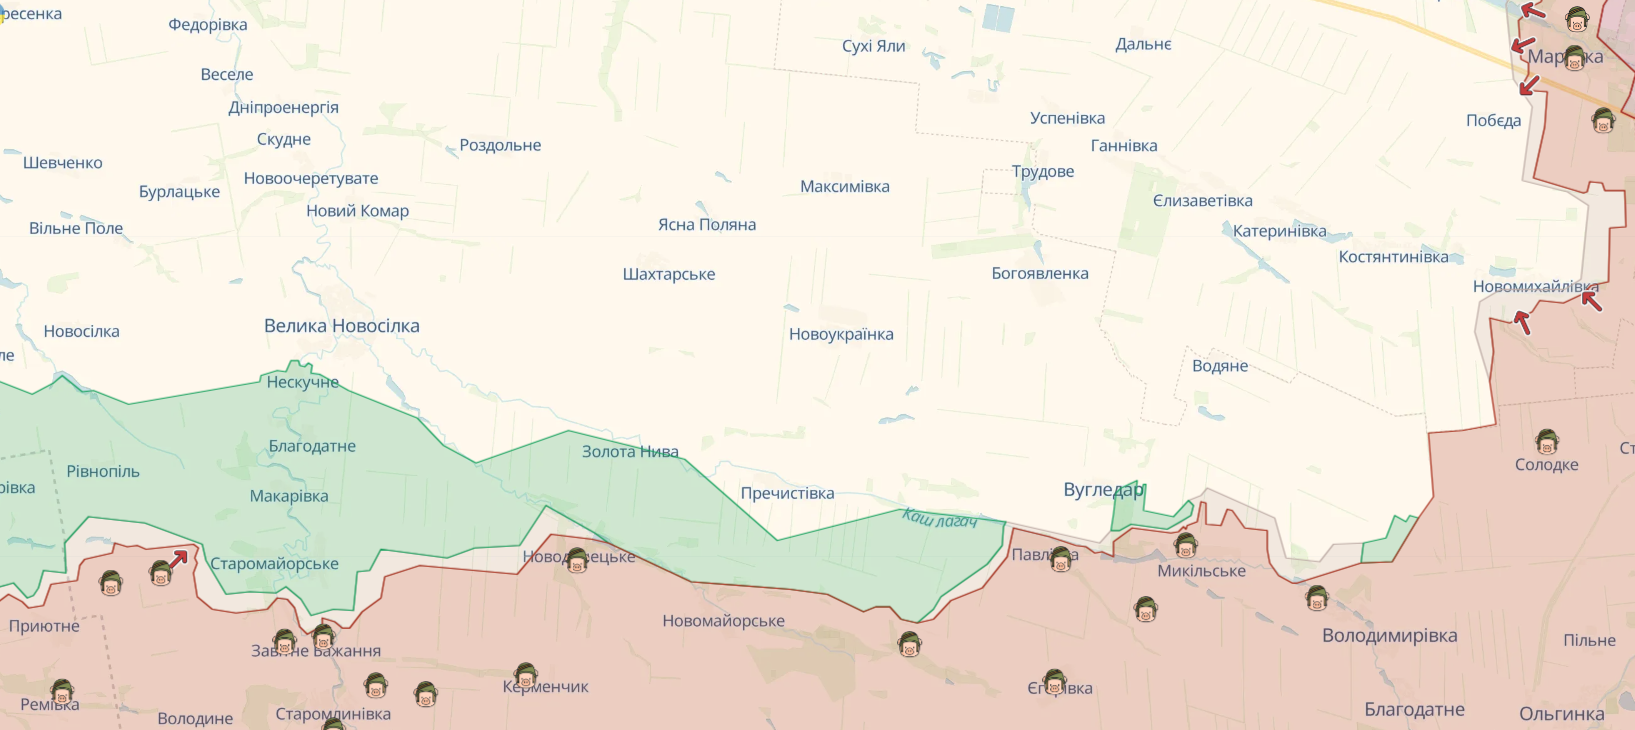 The situation in the Shakhtarsk direction